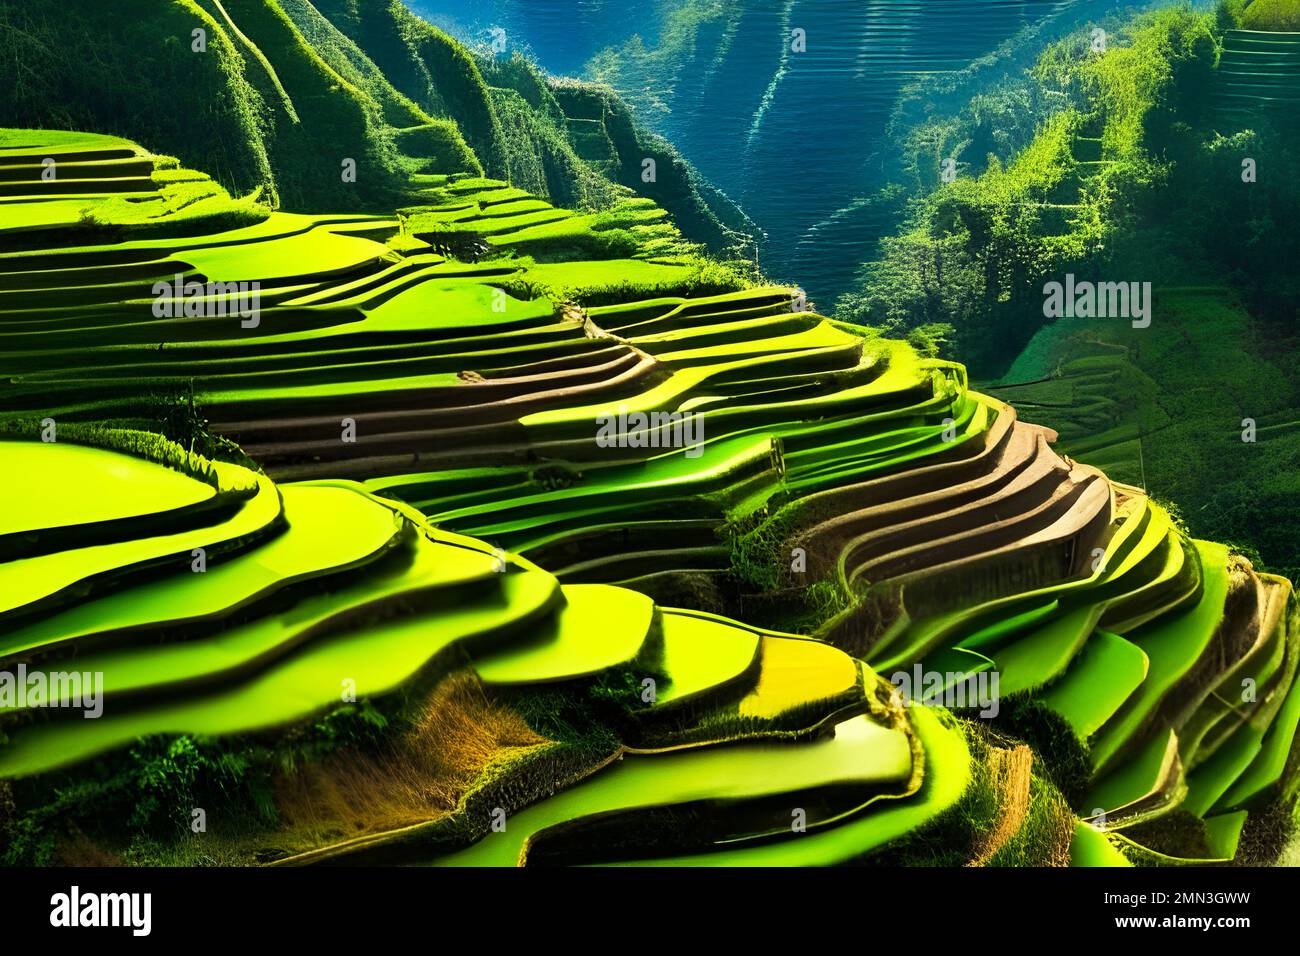 Banaue rice terraces in Hungduan, Philippines depiction. Stock Photo